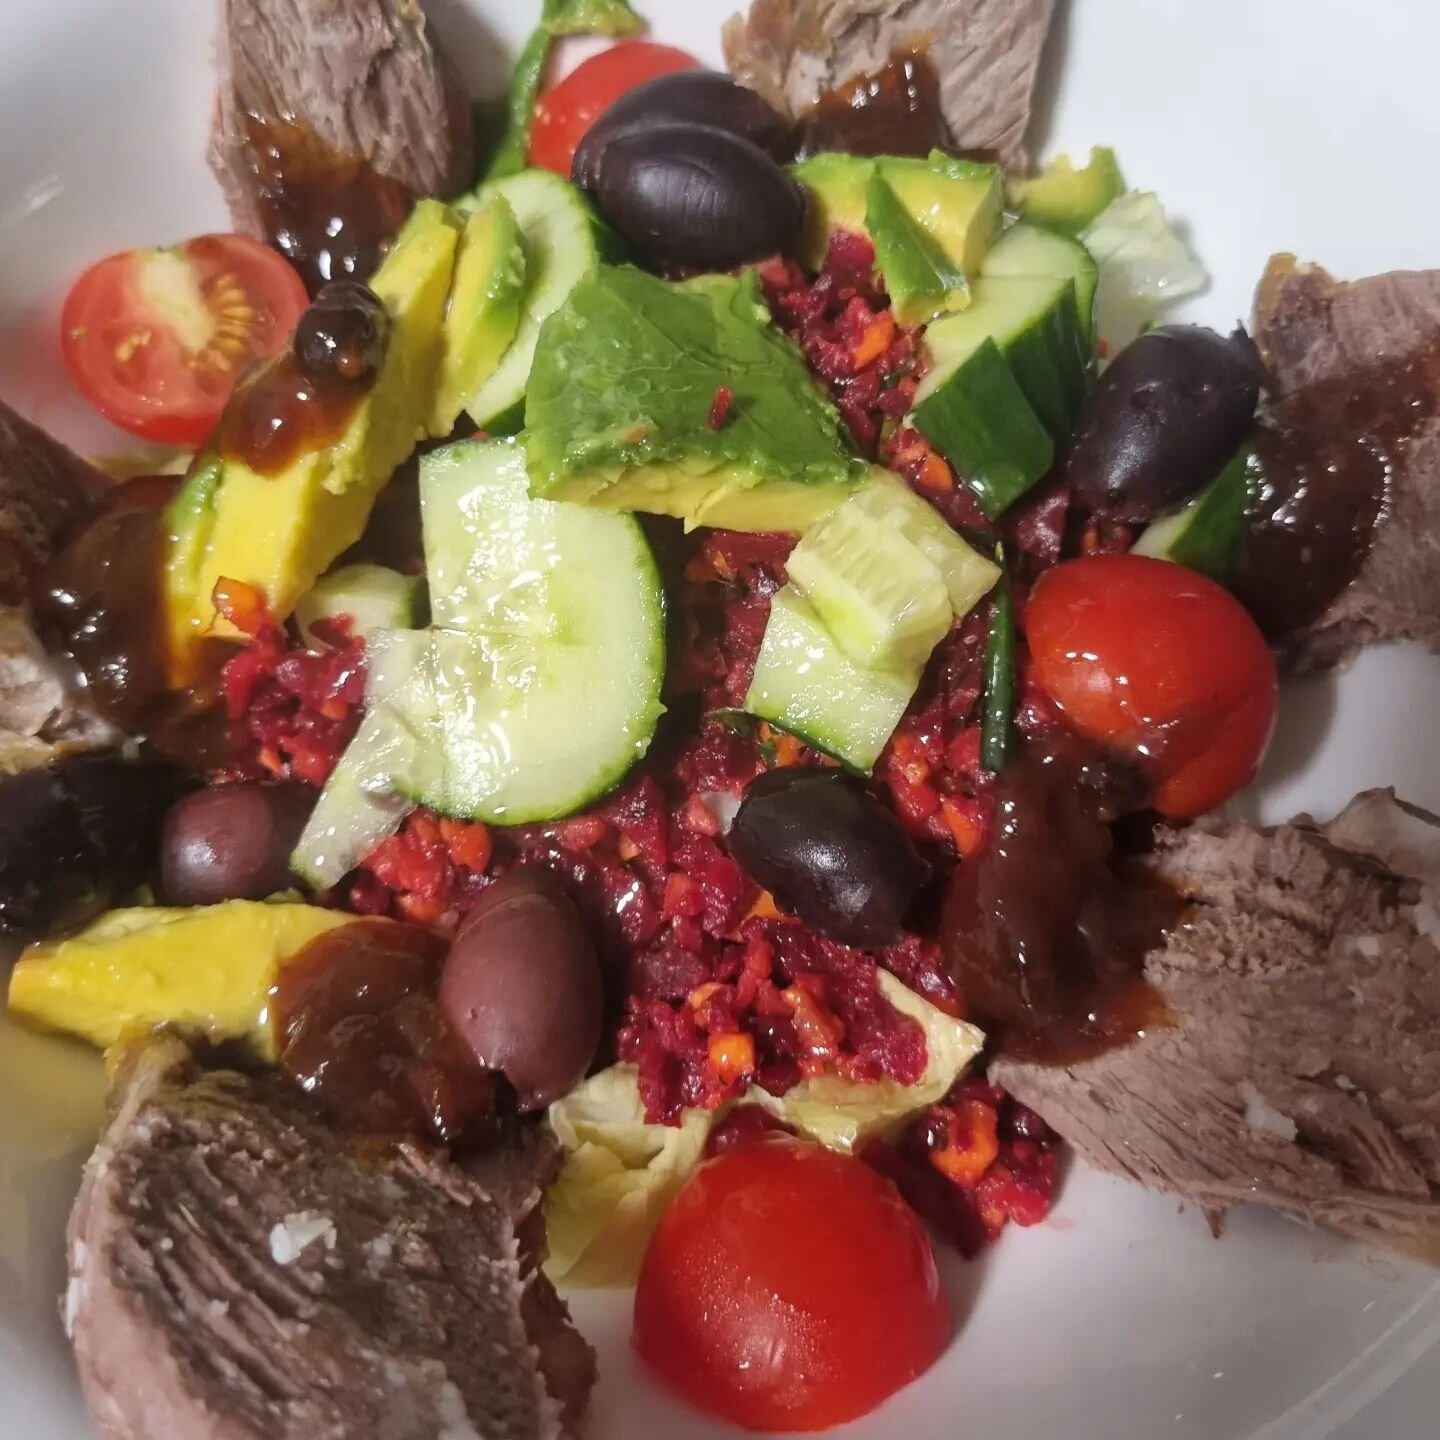 Simple food is often my favourite. The bright colours and fresh flavours.
This salad has lettuce, beetroot salad, avo, cucumber, cherry tomatoes*, olives, roast lamb, chutney*, apple cider vinegar, olive oil.
* reintros